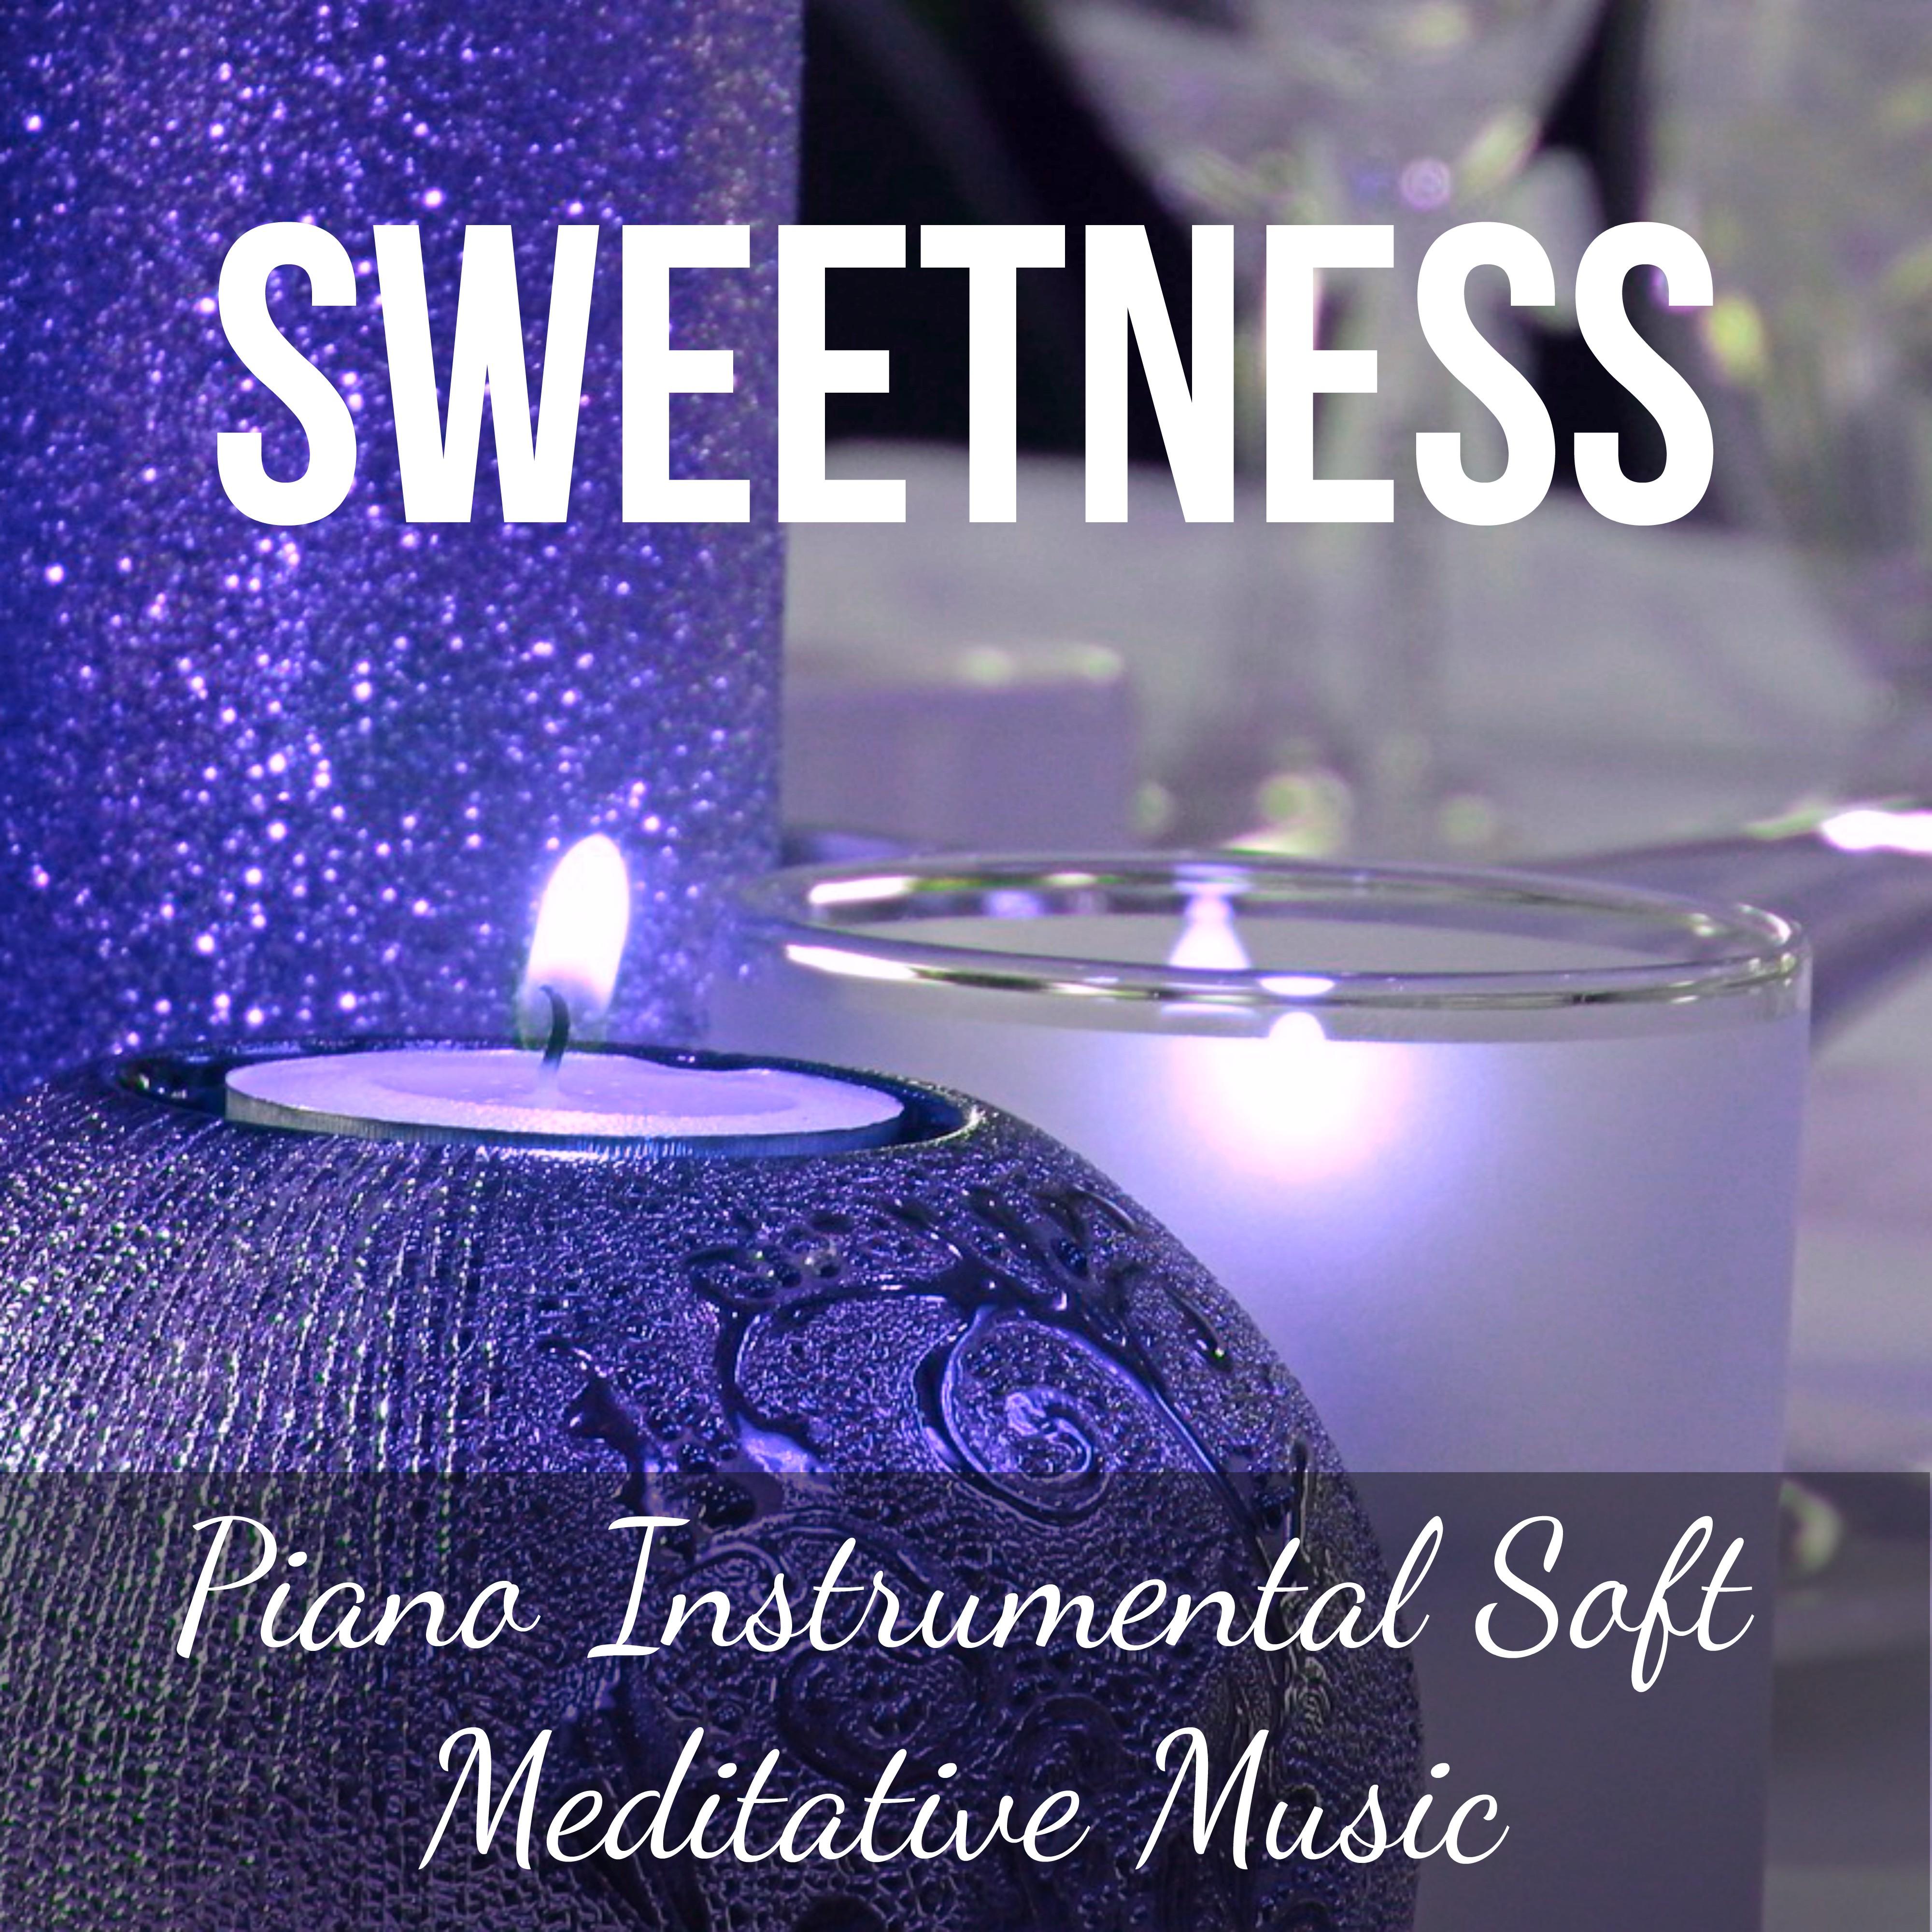 Sweetness - Piano Instrumental Soft Meditative Music for Good Morning Love Moments Magic Christmas with Relaxing Mindfulness Healing Sounds